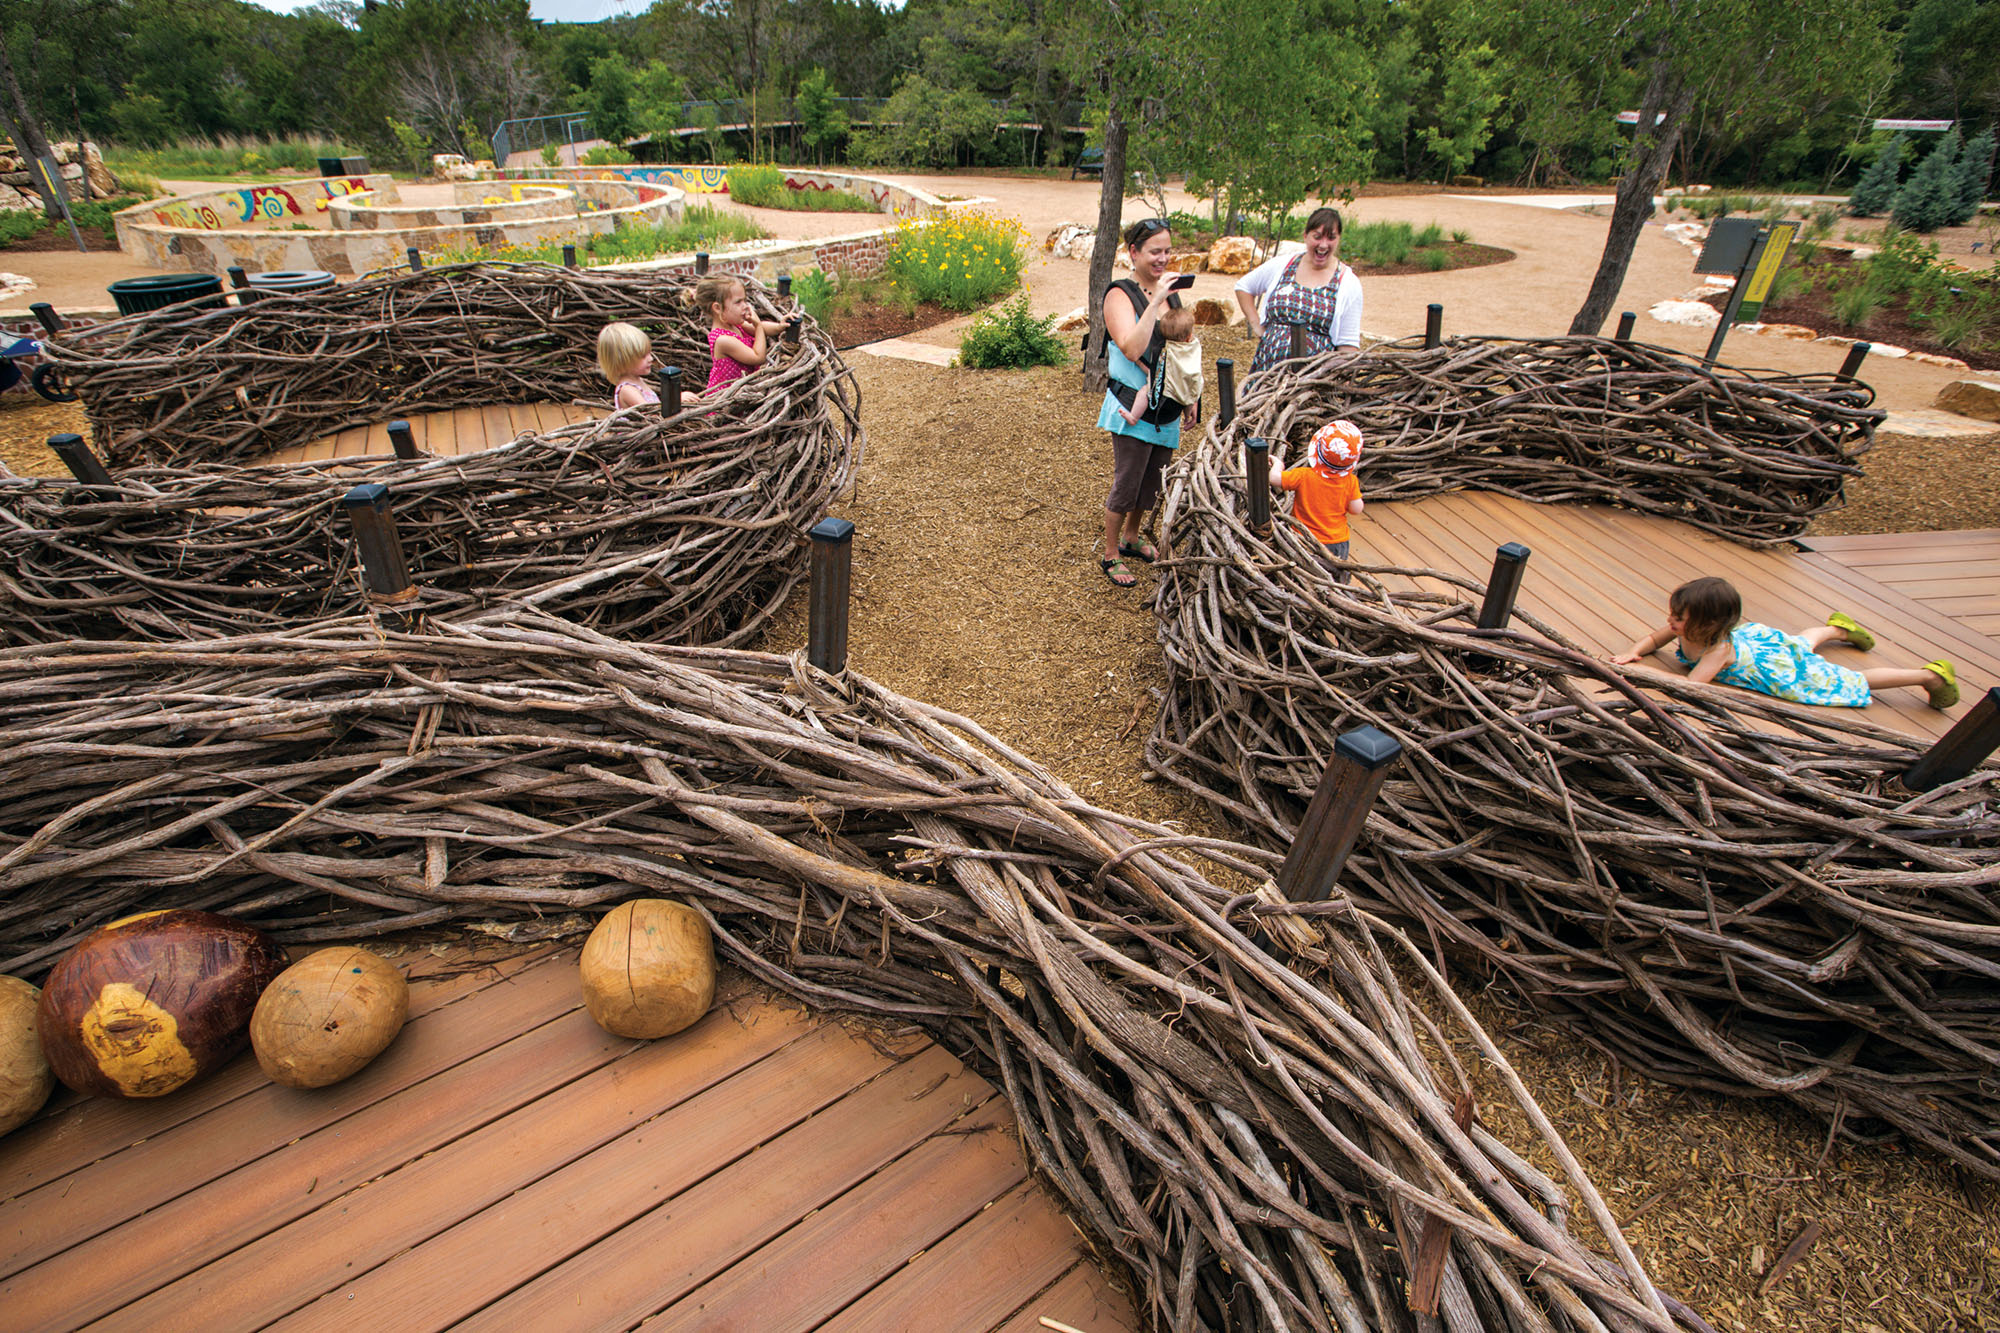 Families with small children stand inside human-scaled birds nests at the Lady Bird Johnson Wildflower Center's Family Garden